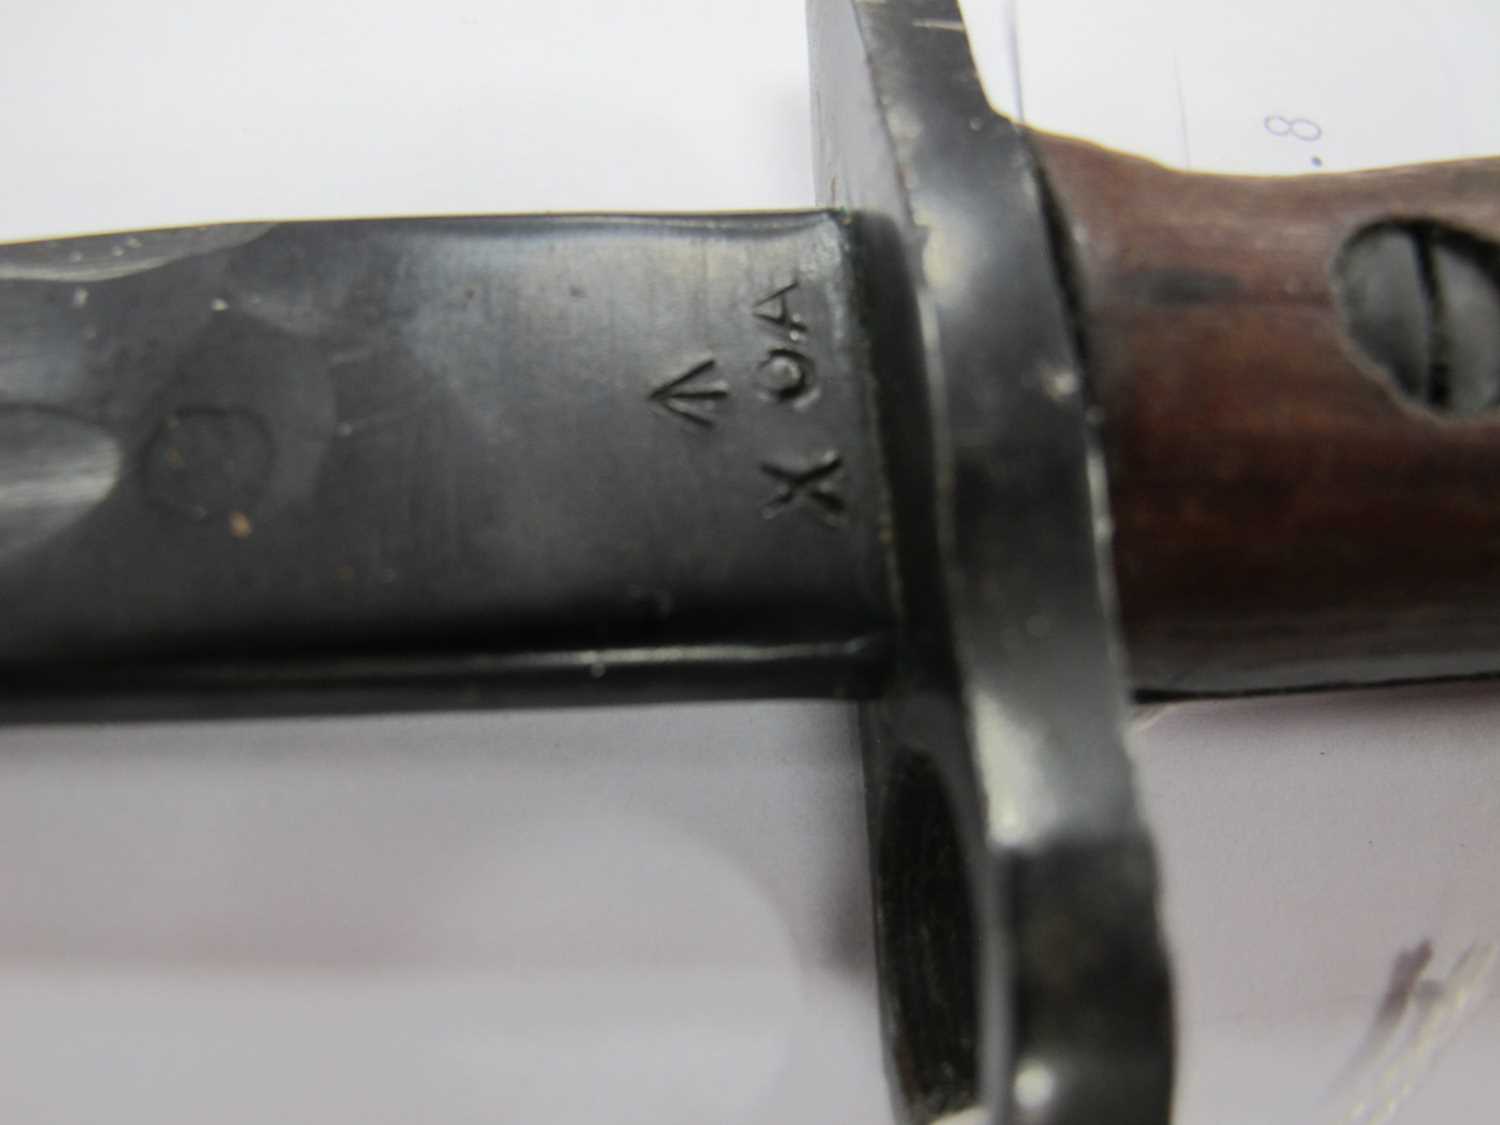 WWII Australian 1907 Pattern Short Bayonet, with various marks on blade including year '45', - Image 6 of 12